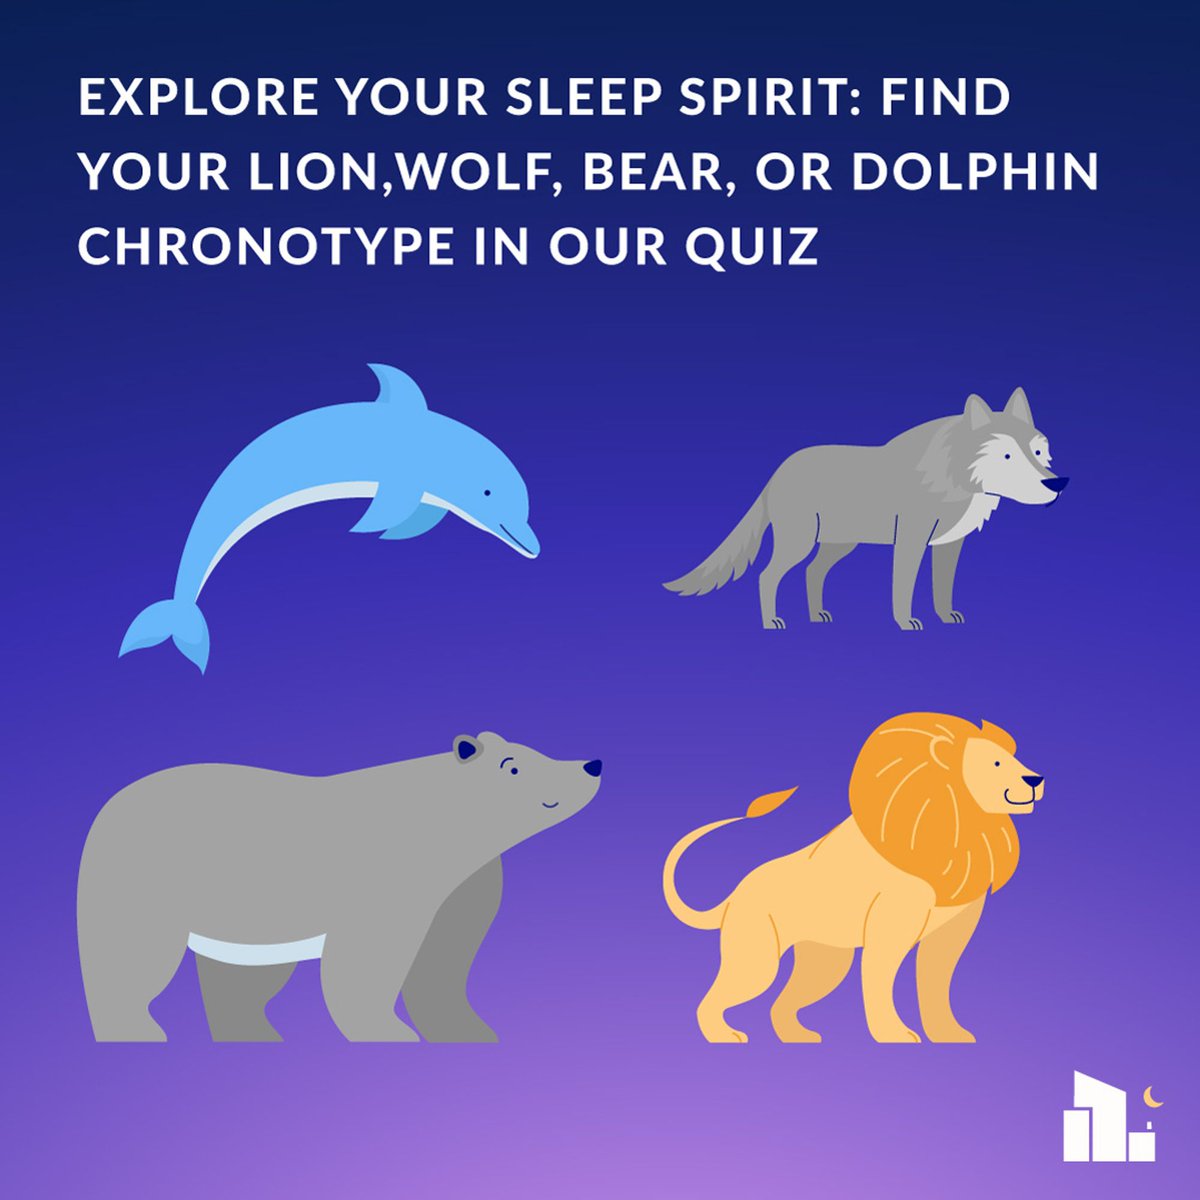 Time to discover your spirit animal! 🐬🦁🐻🐺 Whether you're a dolphin, lion, bear, or wolf when it comes to sleep, our community embraces diverse routines. Ready to find your sleep tribe? l8r.it/5Sye